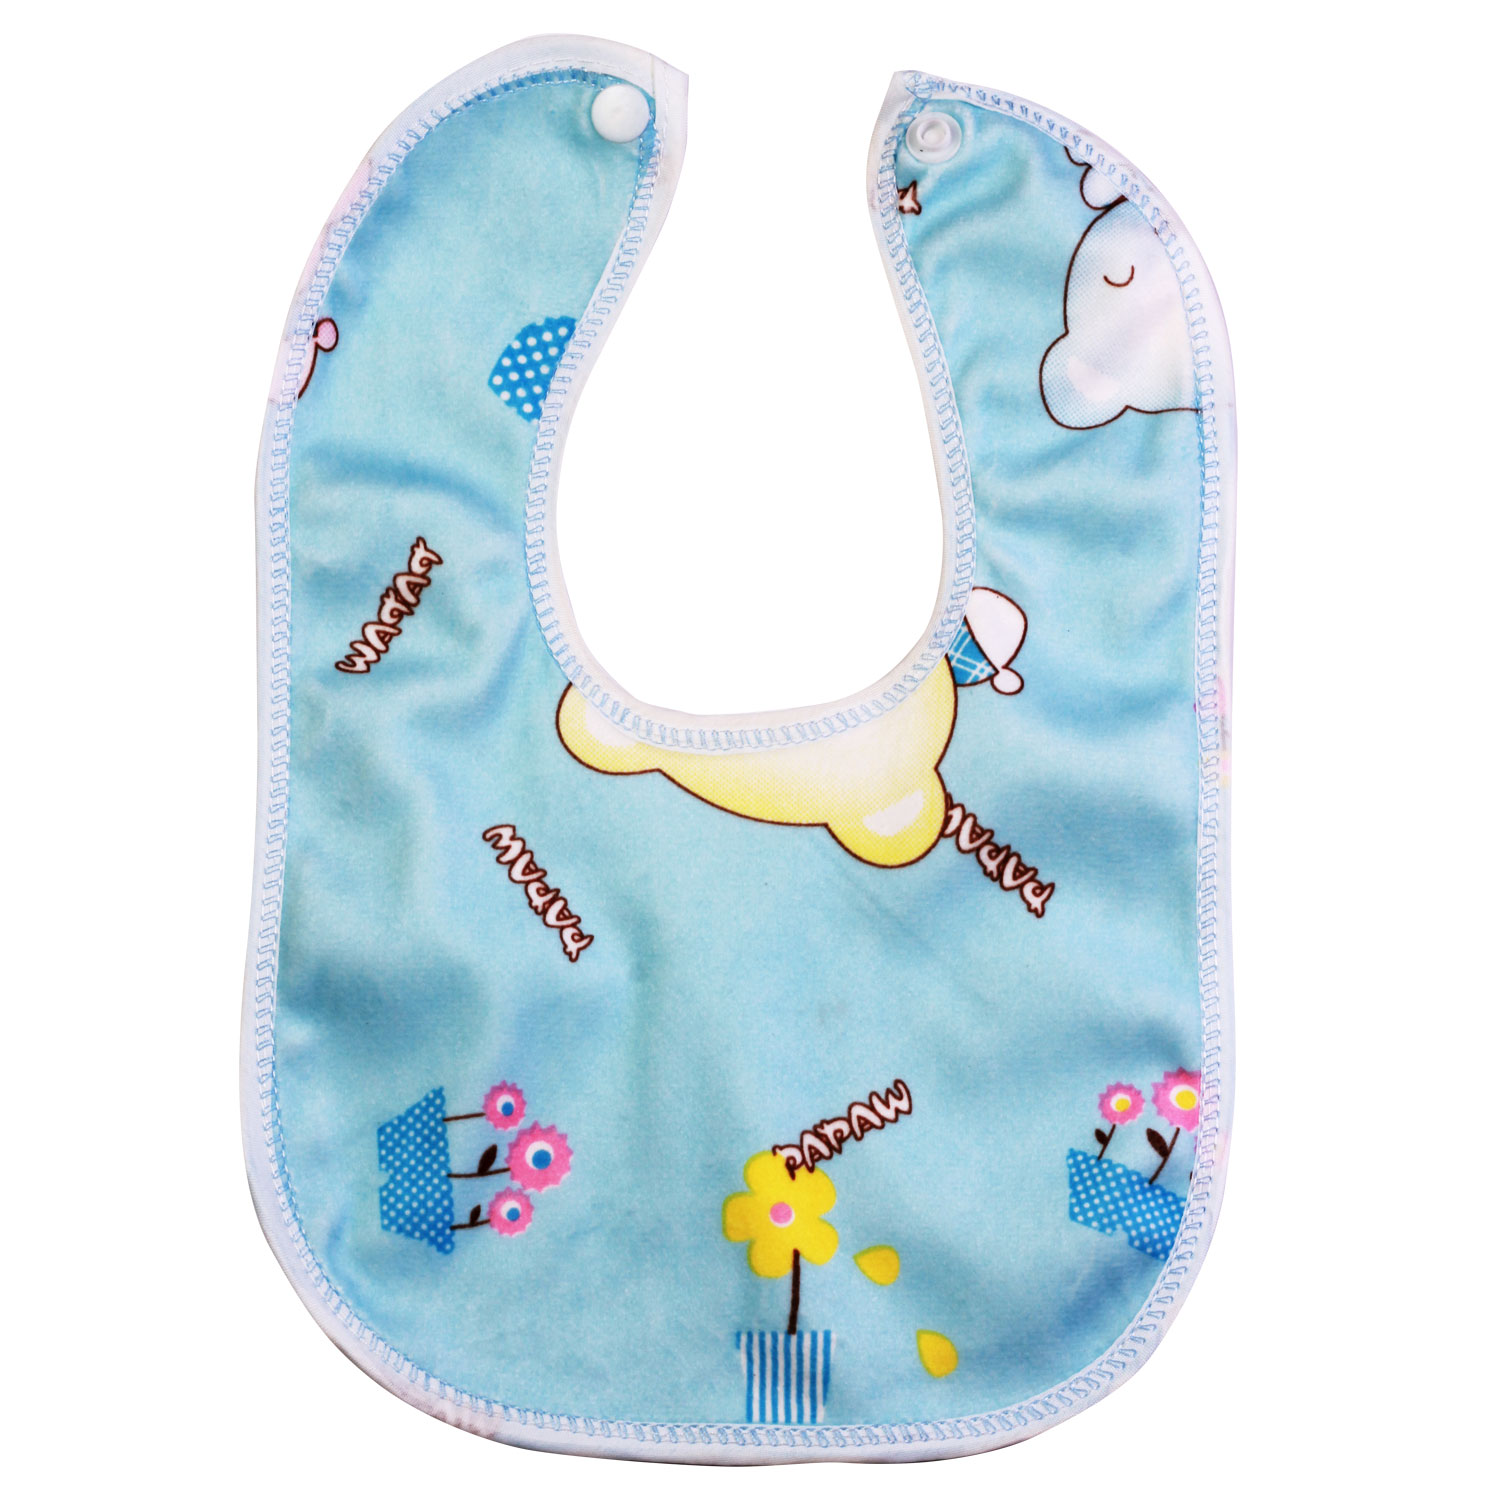 bibs with button closure